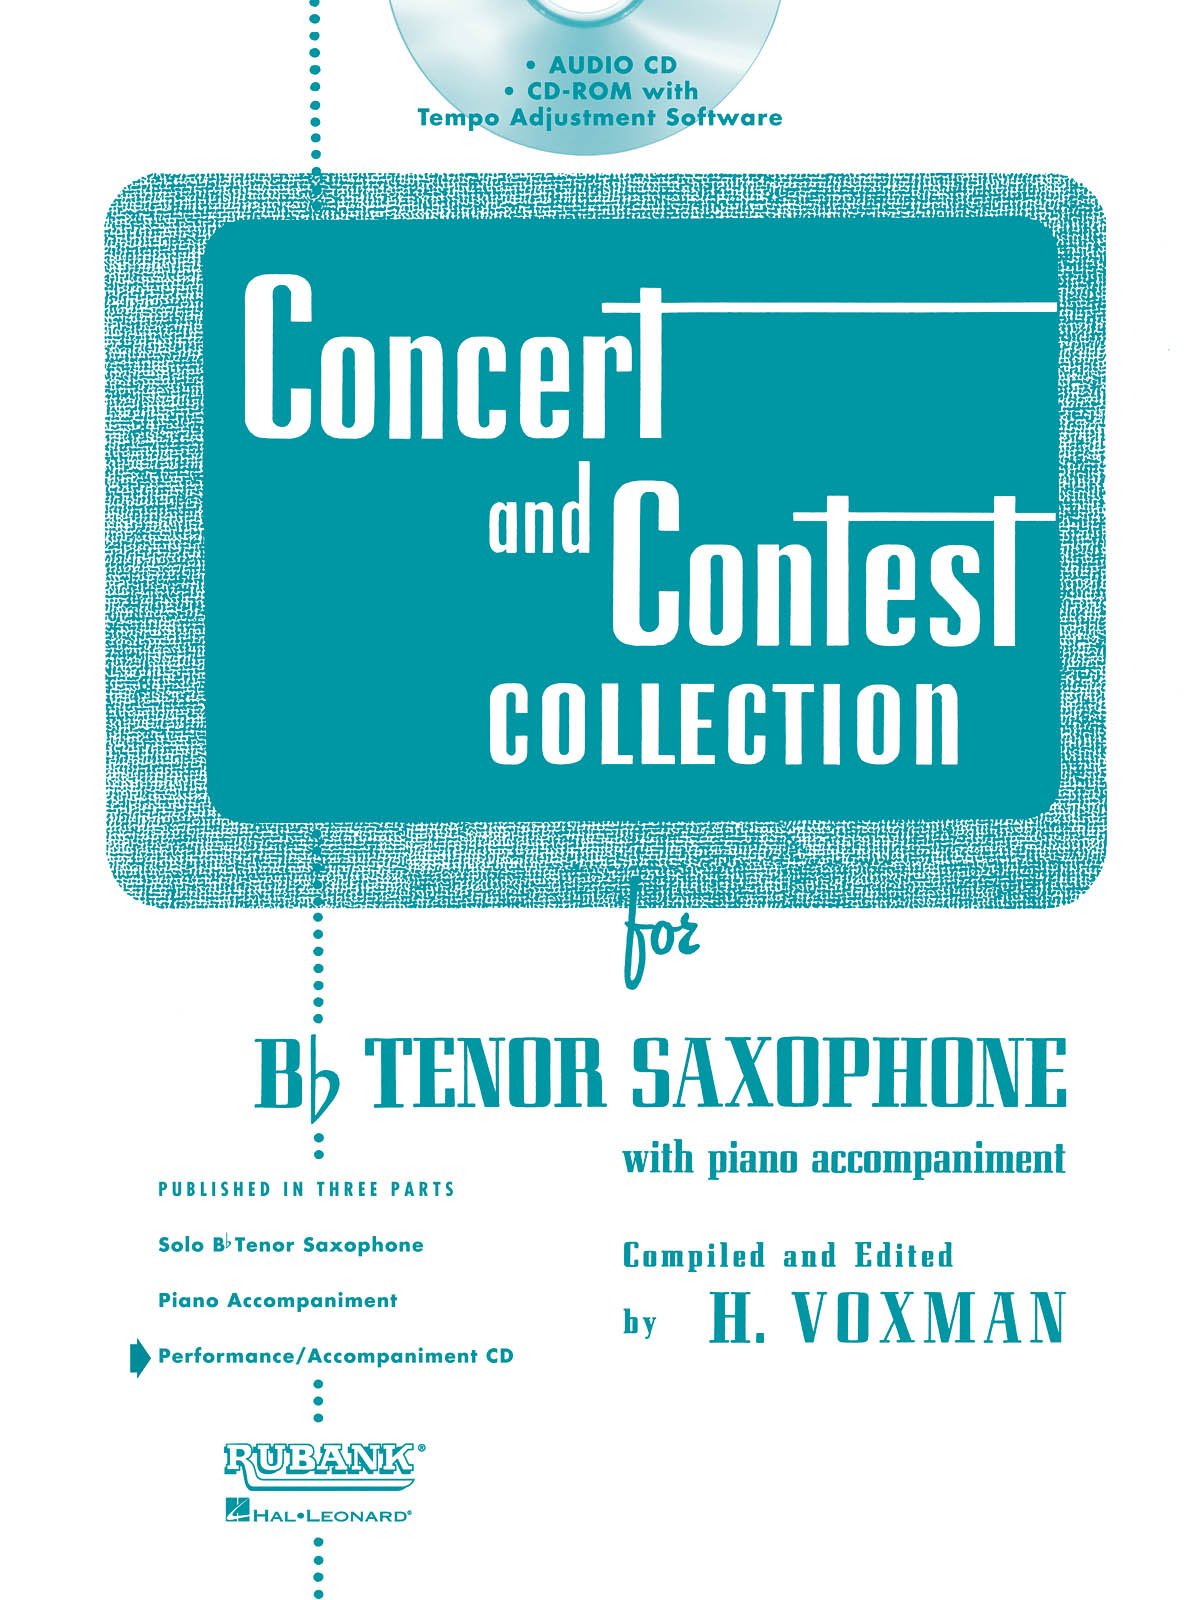 Concert And Contest Collection: Tenor Saxophone: CD-ROM